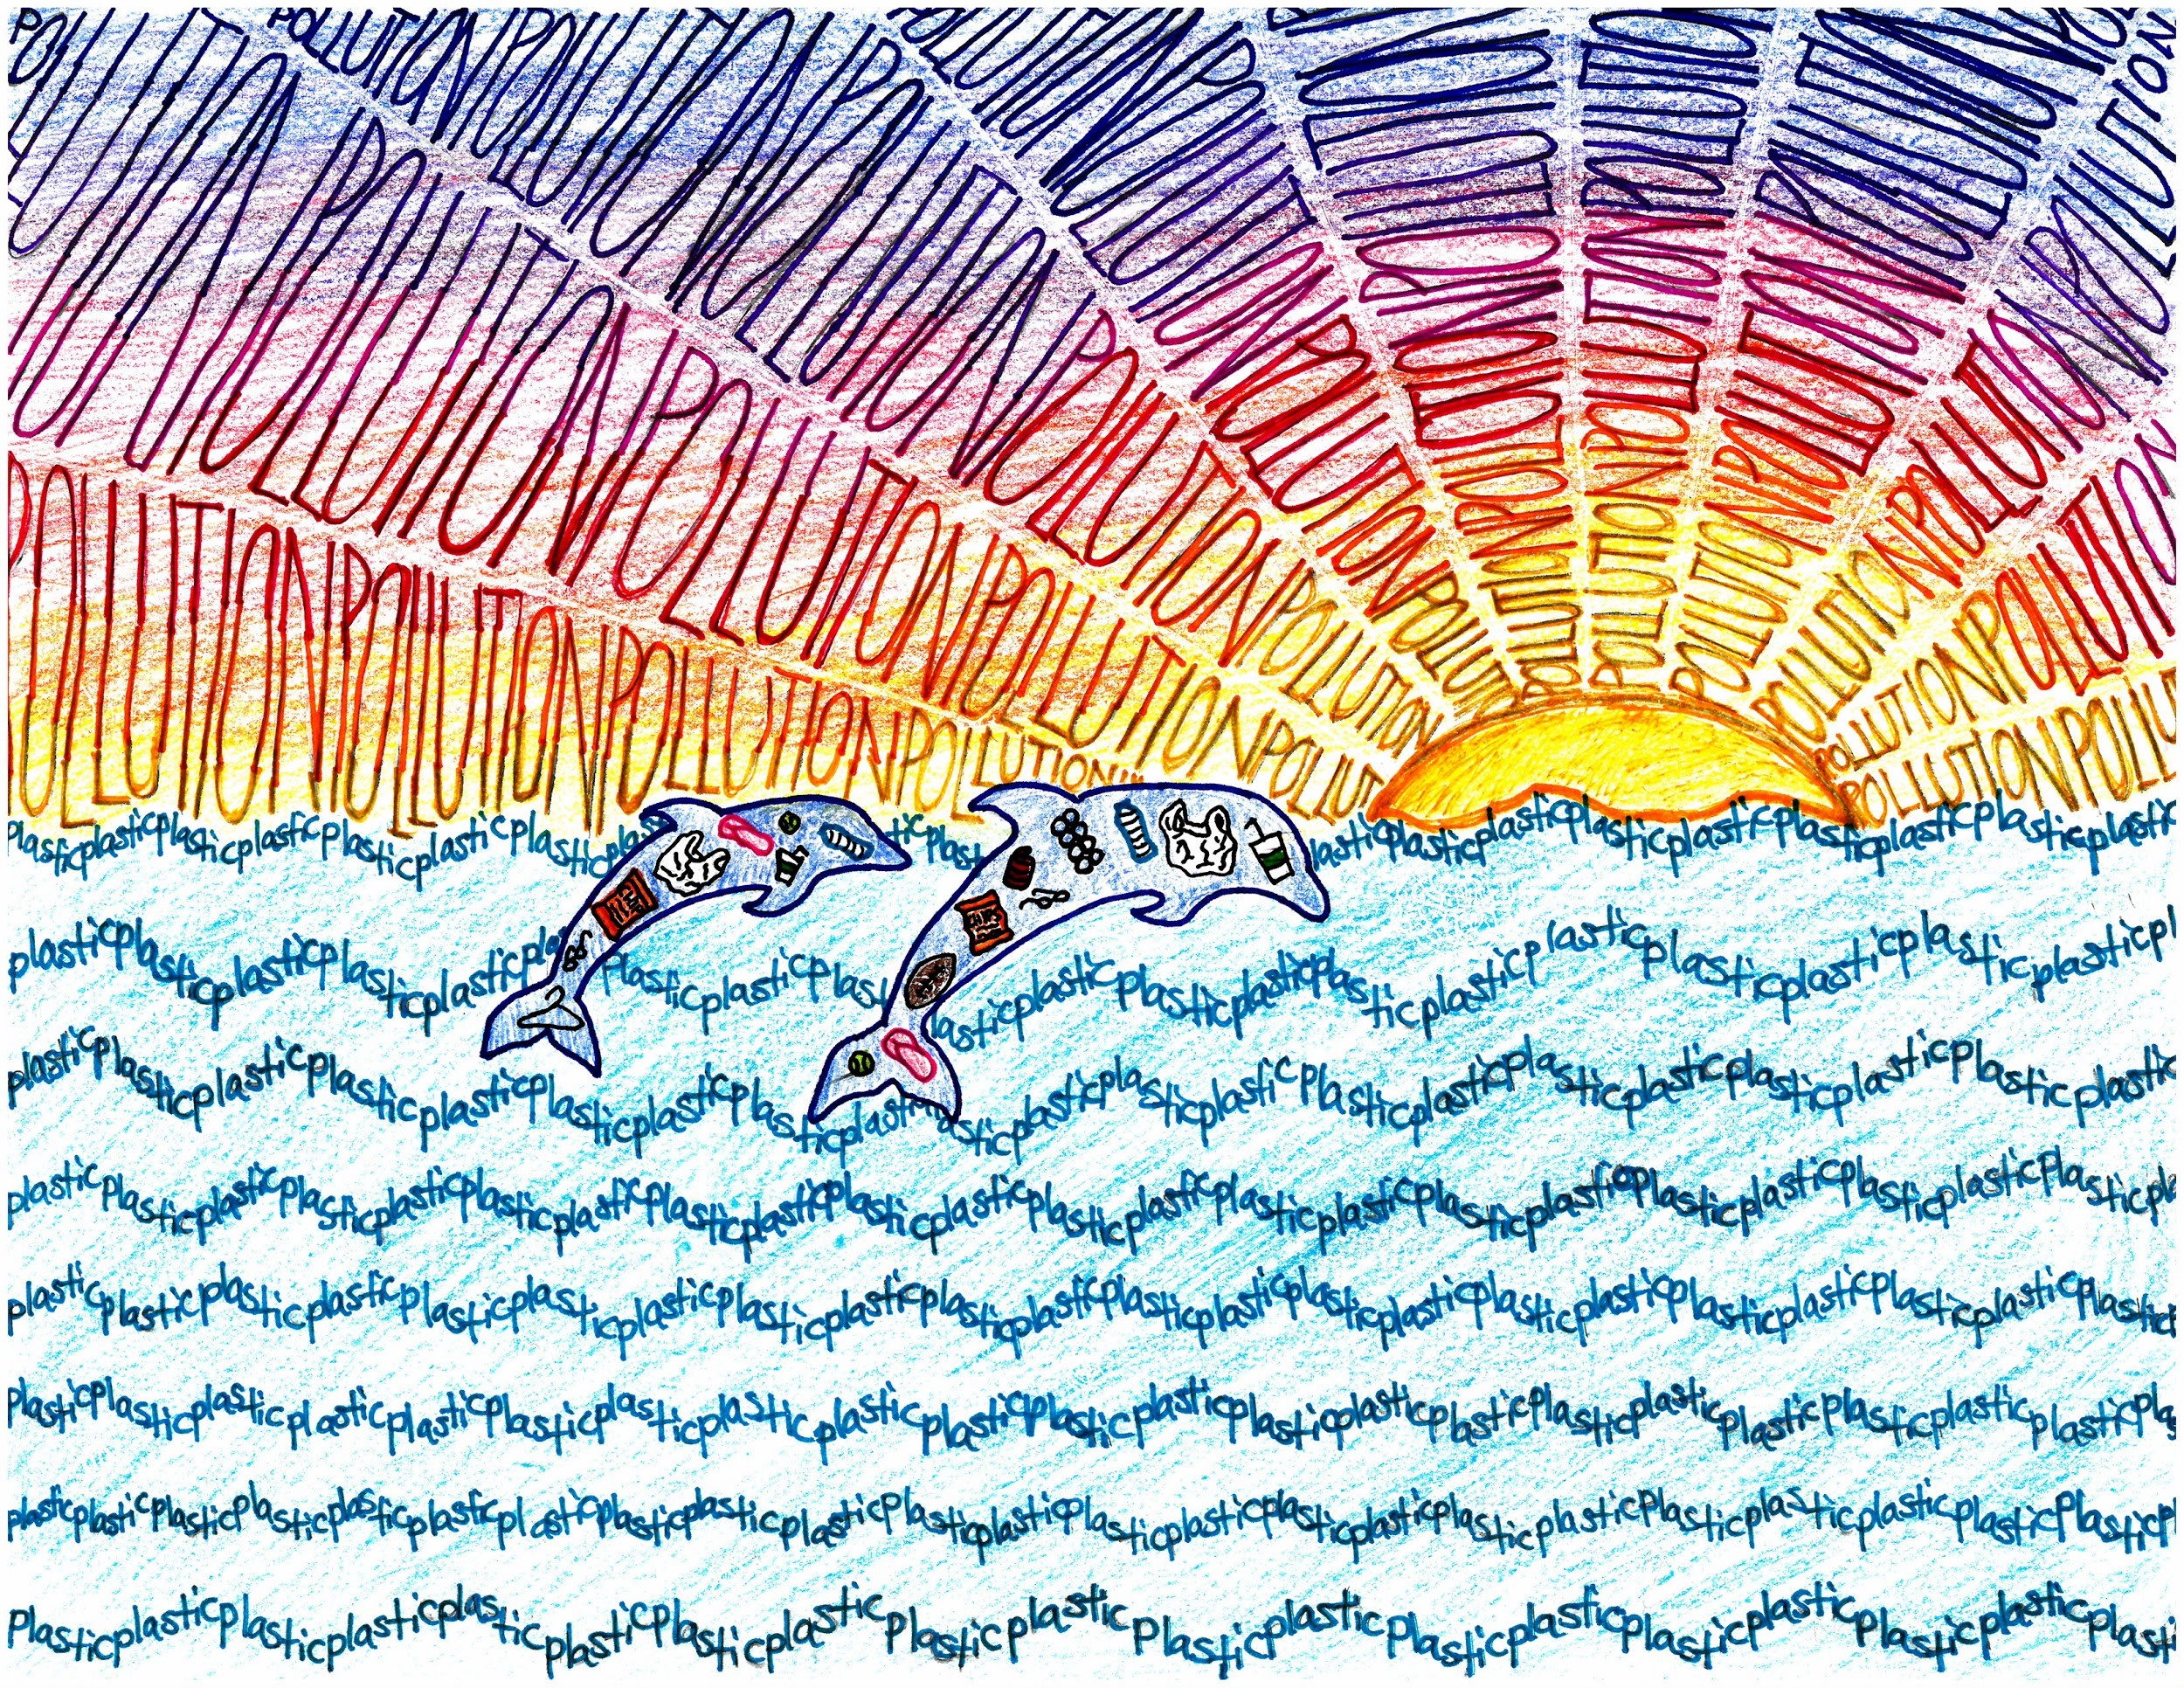 Child’s artwork depicting two dolphins surfacing with a sunset in the background. The ocean waves read the repetitive word "plastic" and the rays from the sun read "pollution." The dolphins have marine debris inside their bodies, such as plastic, straws, and other items.